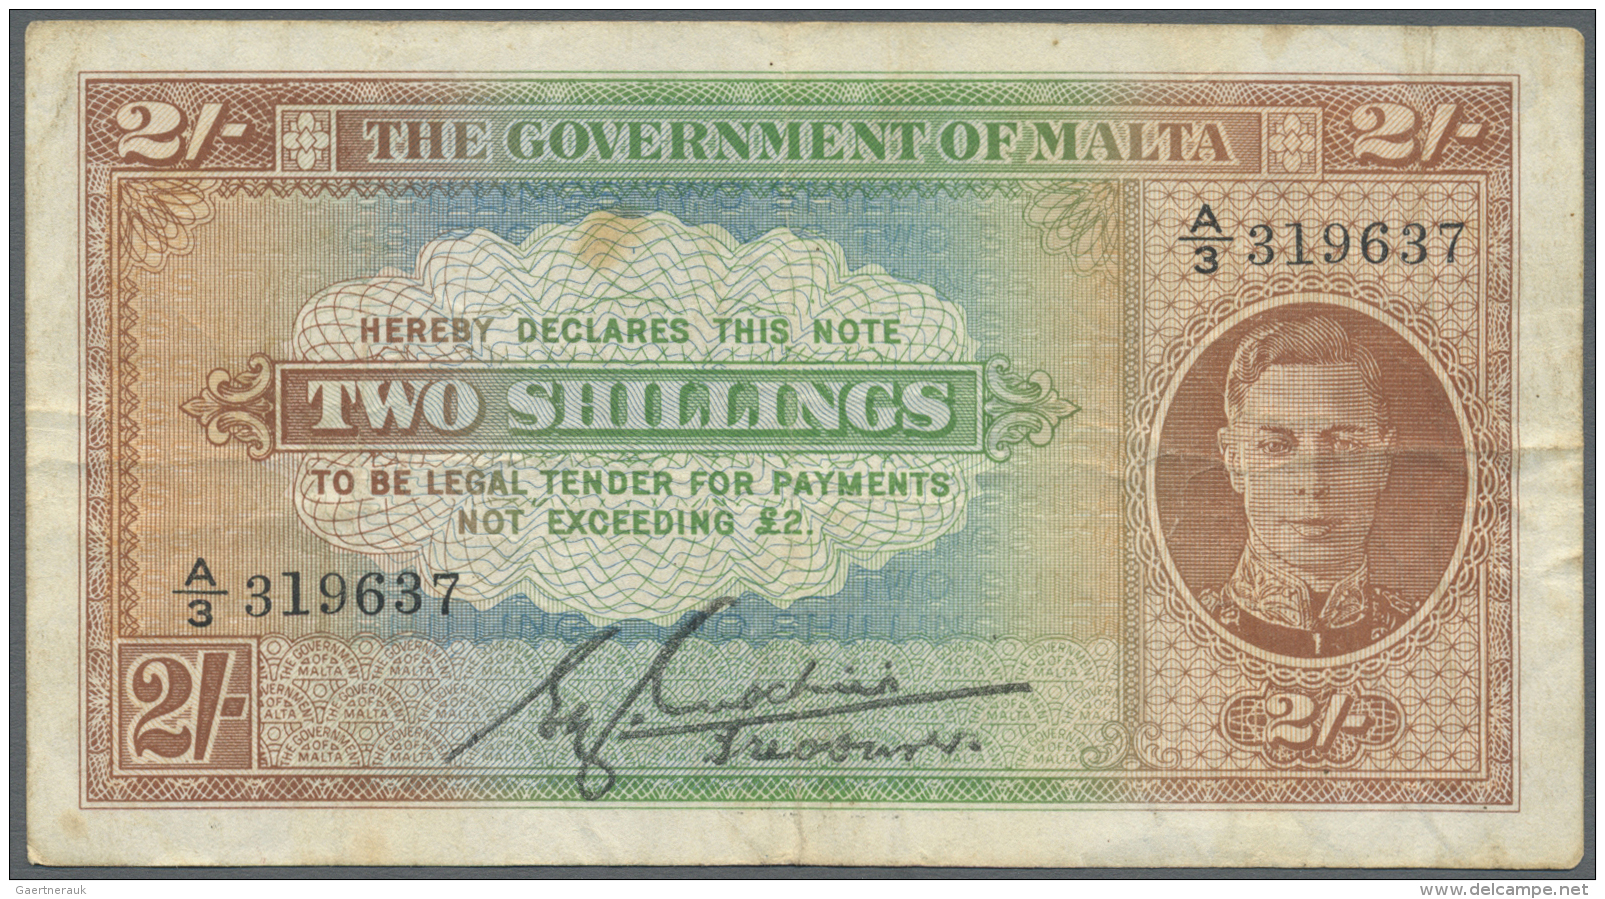 Malta: 2 Shillings 6 Pence ND(1940) P. 18 With 3 Pinholes But Without Tears, Condition: F+ To VF-. - Malta